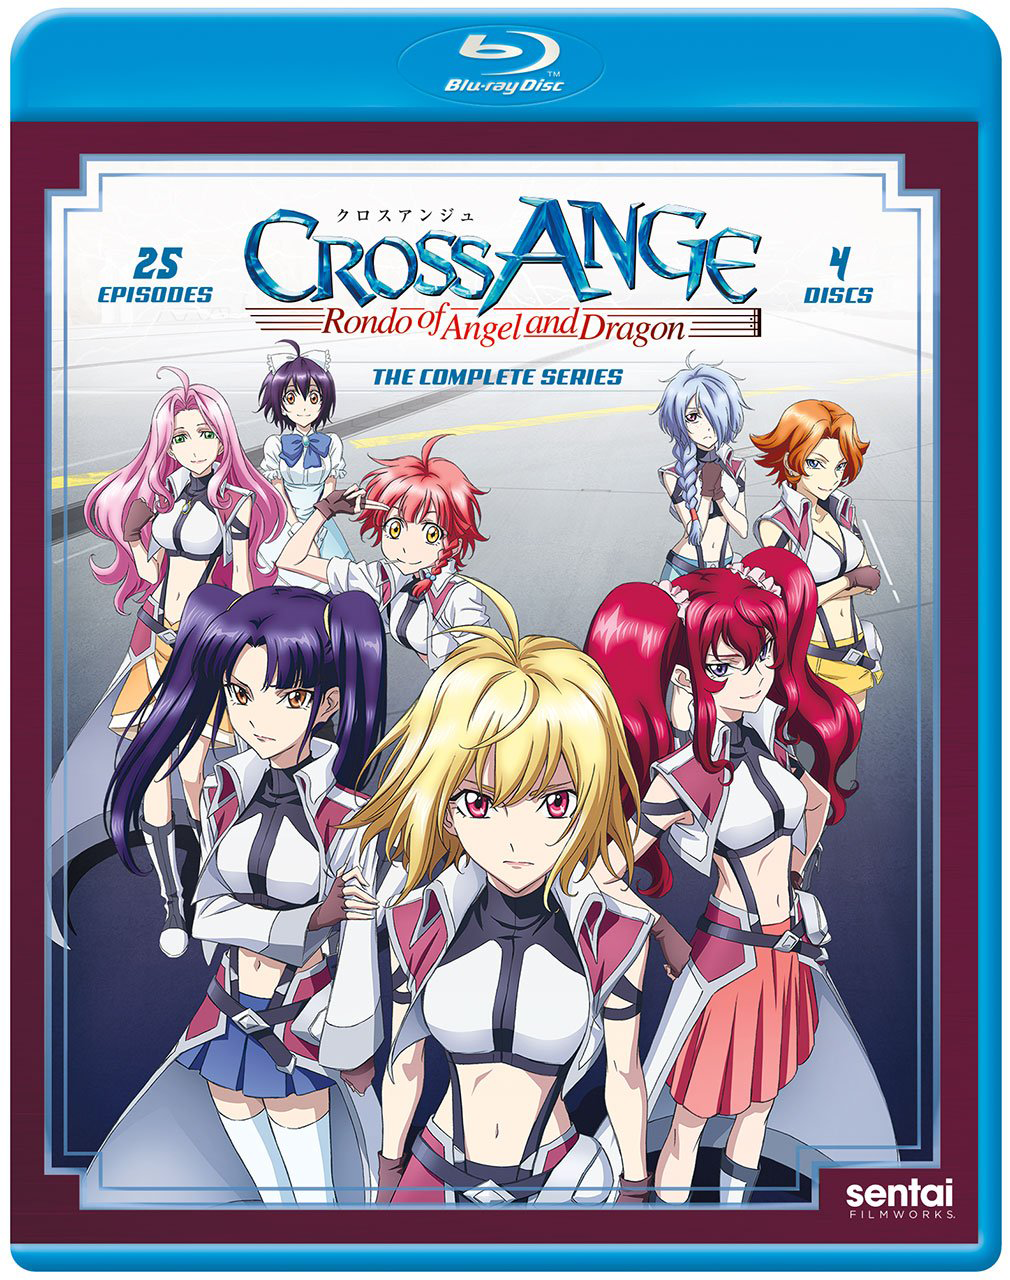 Cross Ange: Rondo of Angels and Dragons - Free comic ComicWalker